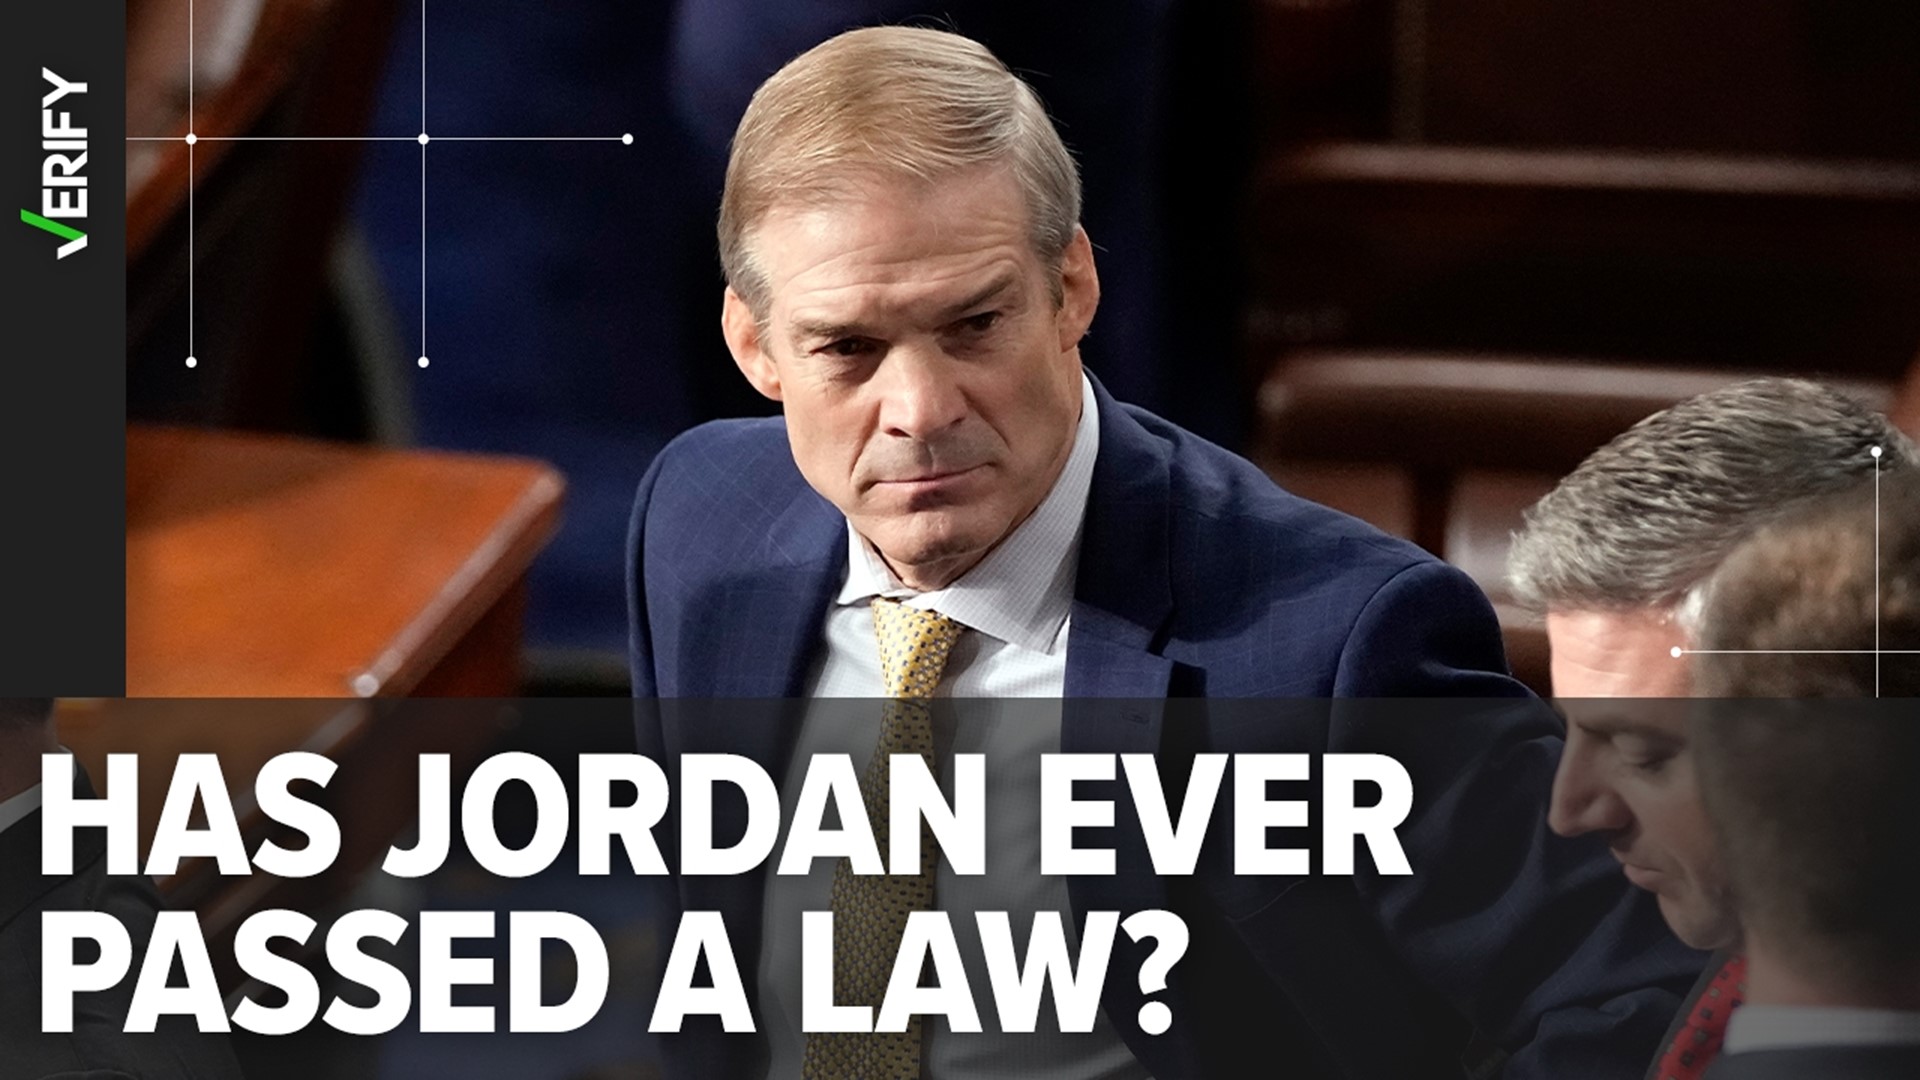 Rep. Jordan seeks to lead the House, but he’s had little success introducing legislation there.